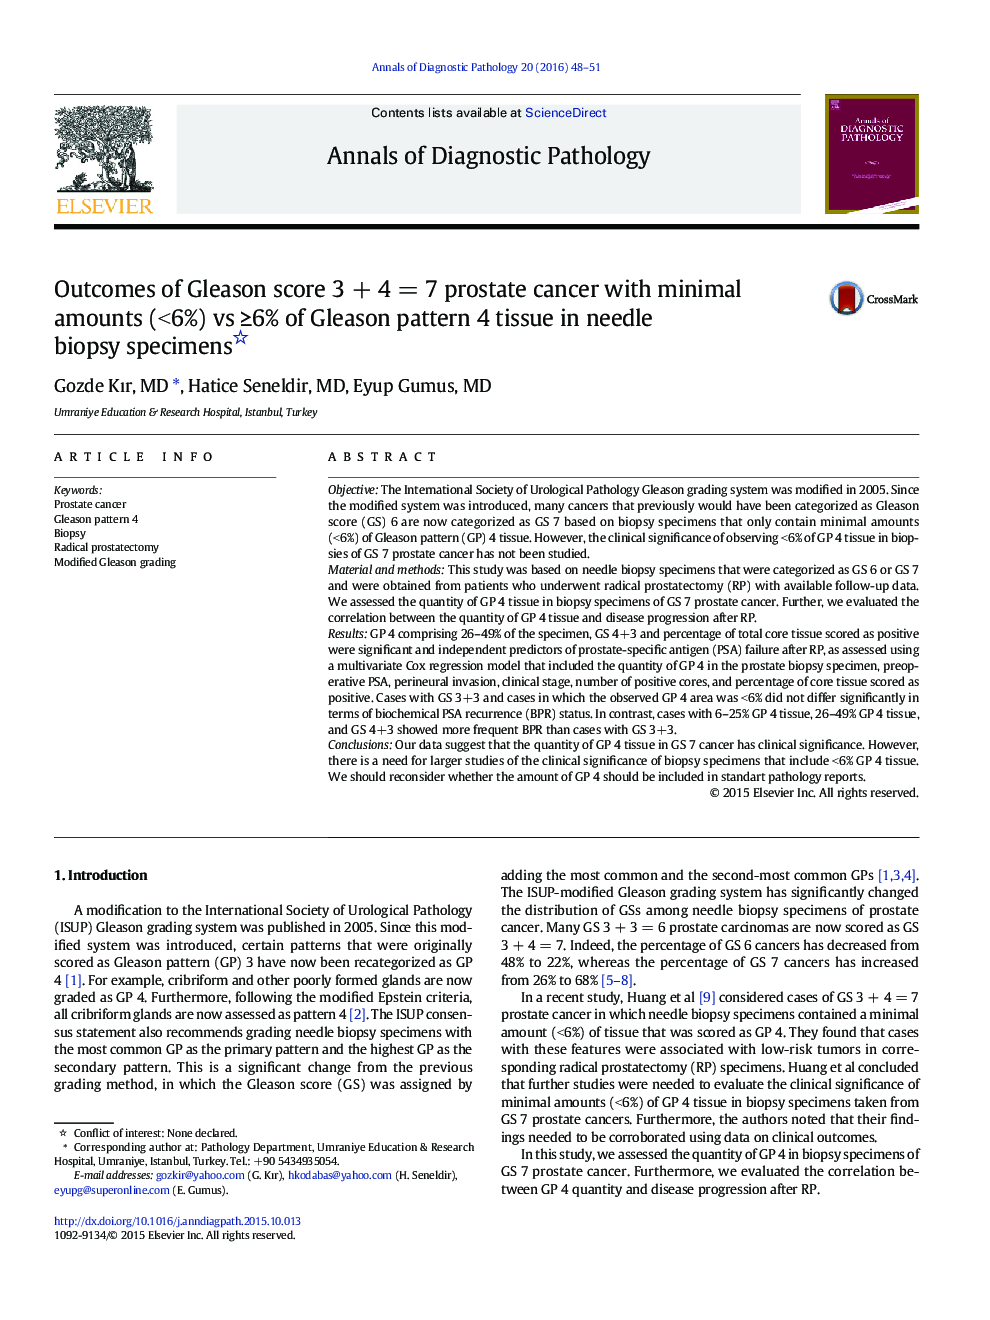 Outcomes of Gleason score 3 + 4 = 7 prostate cancer with minimal amounts (<6%) vs ≥6% of Gleason pattern 4 tissue in needle biopsy specimens 